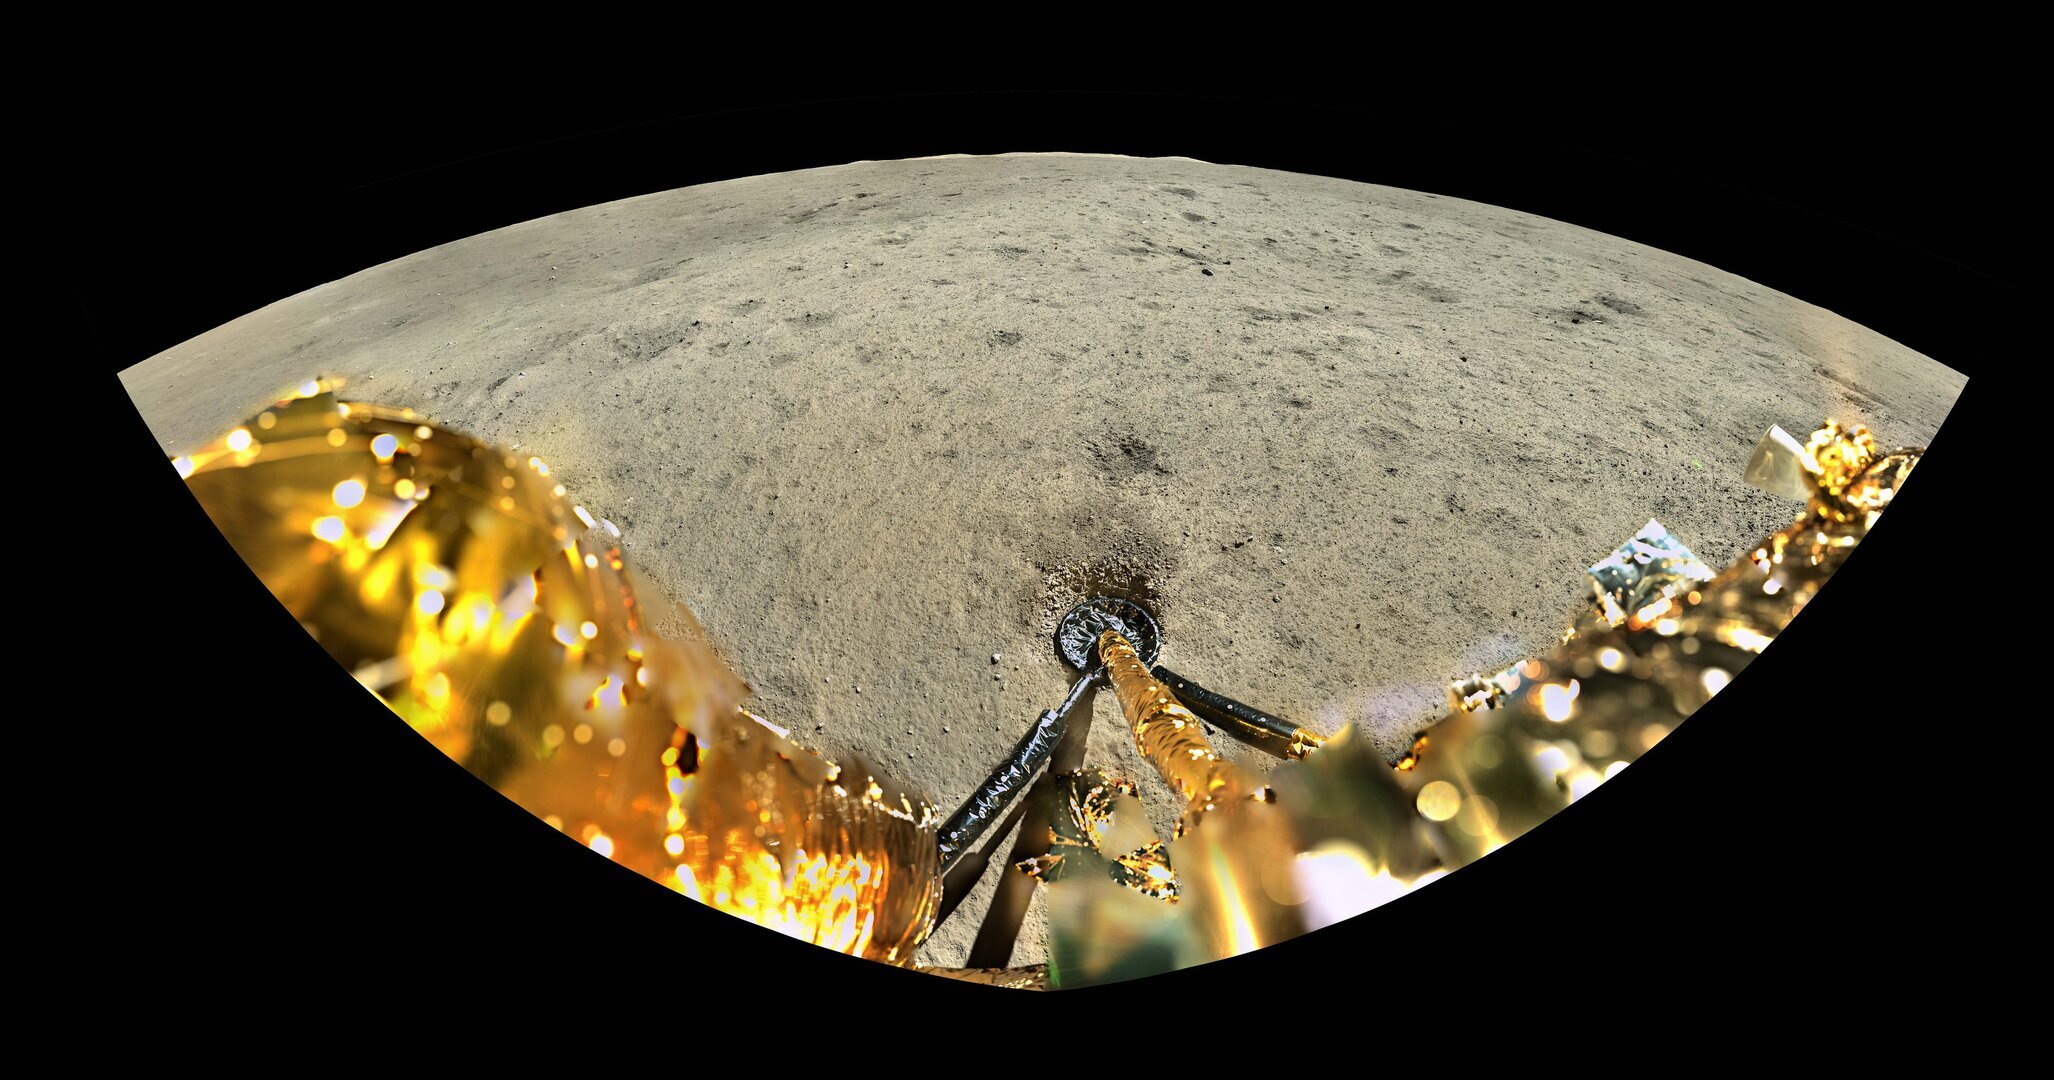 chang-e-6-landing-site-on-the-far-side-of-the-moon-pillars